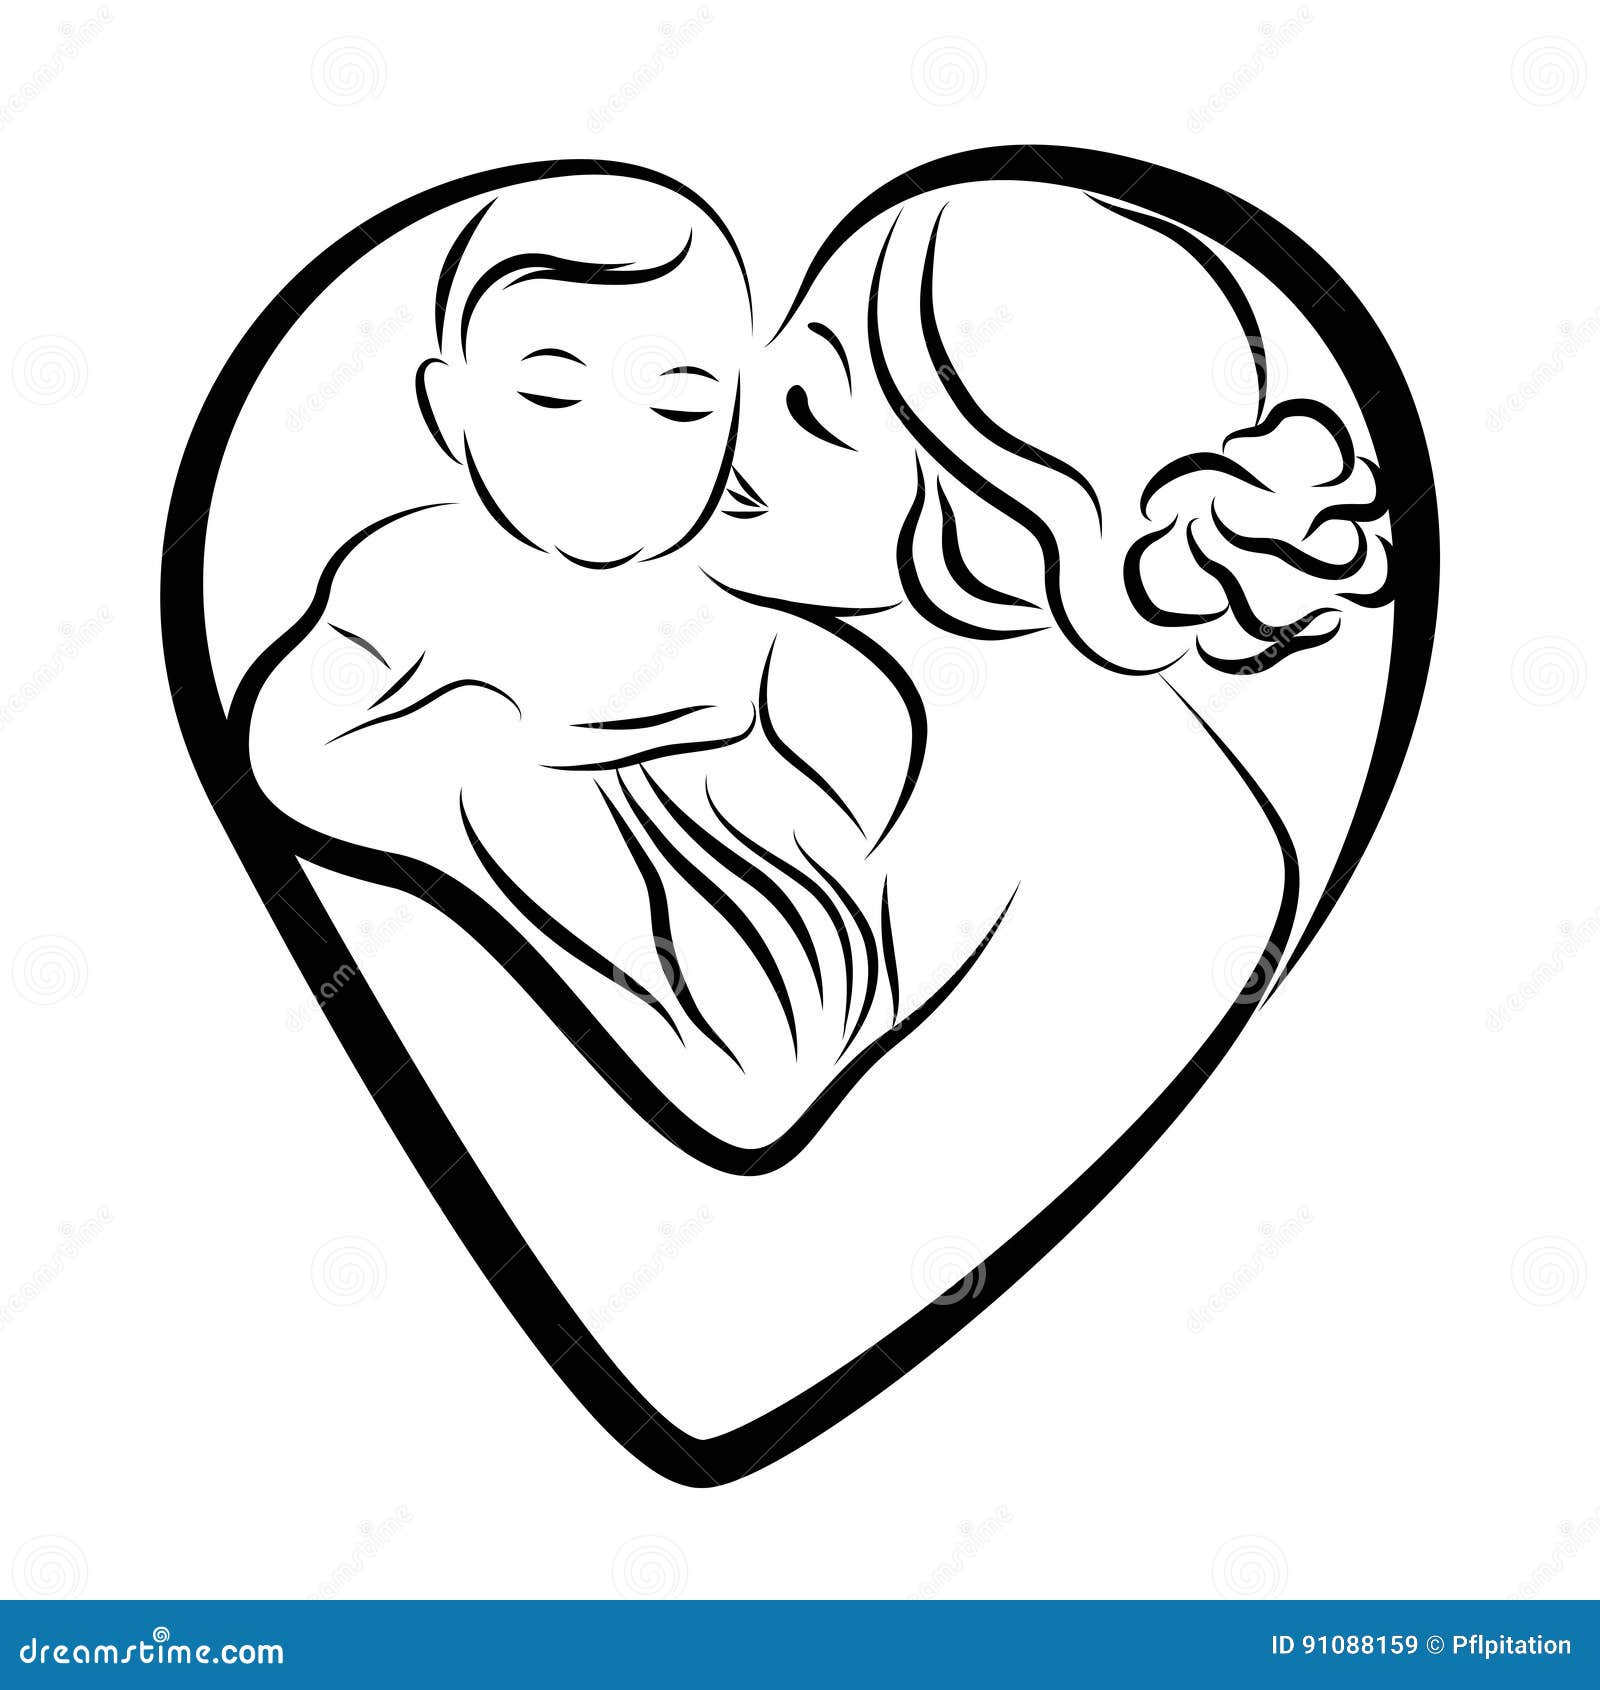 Mother and Child Sketch in Black Lines Stock Vector - Illustration of ...